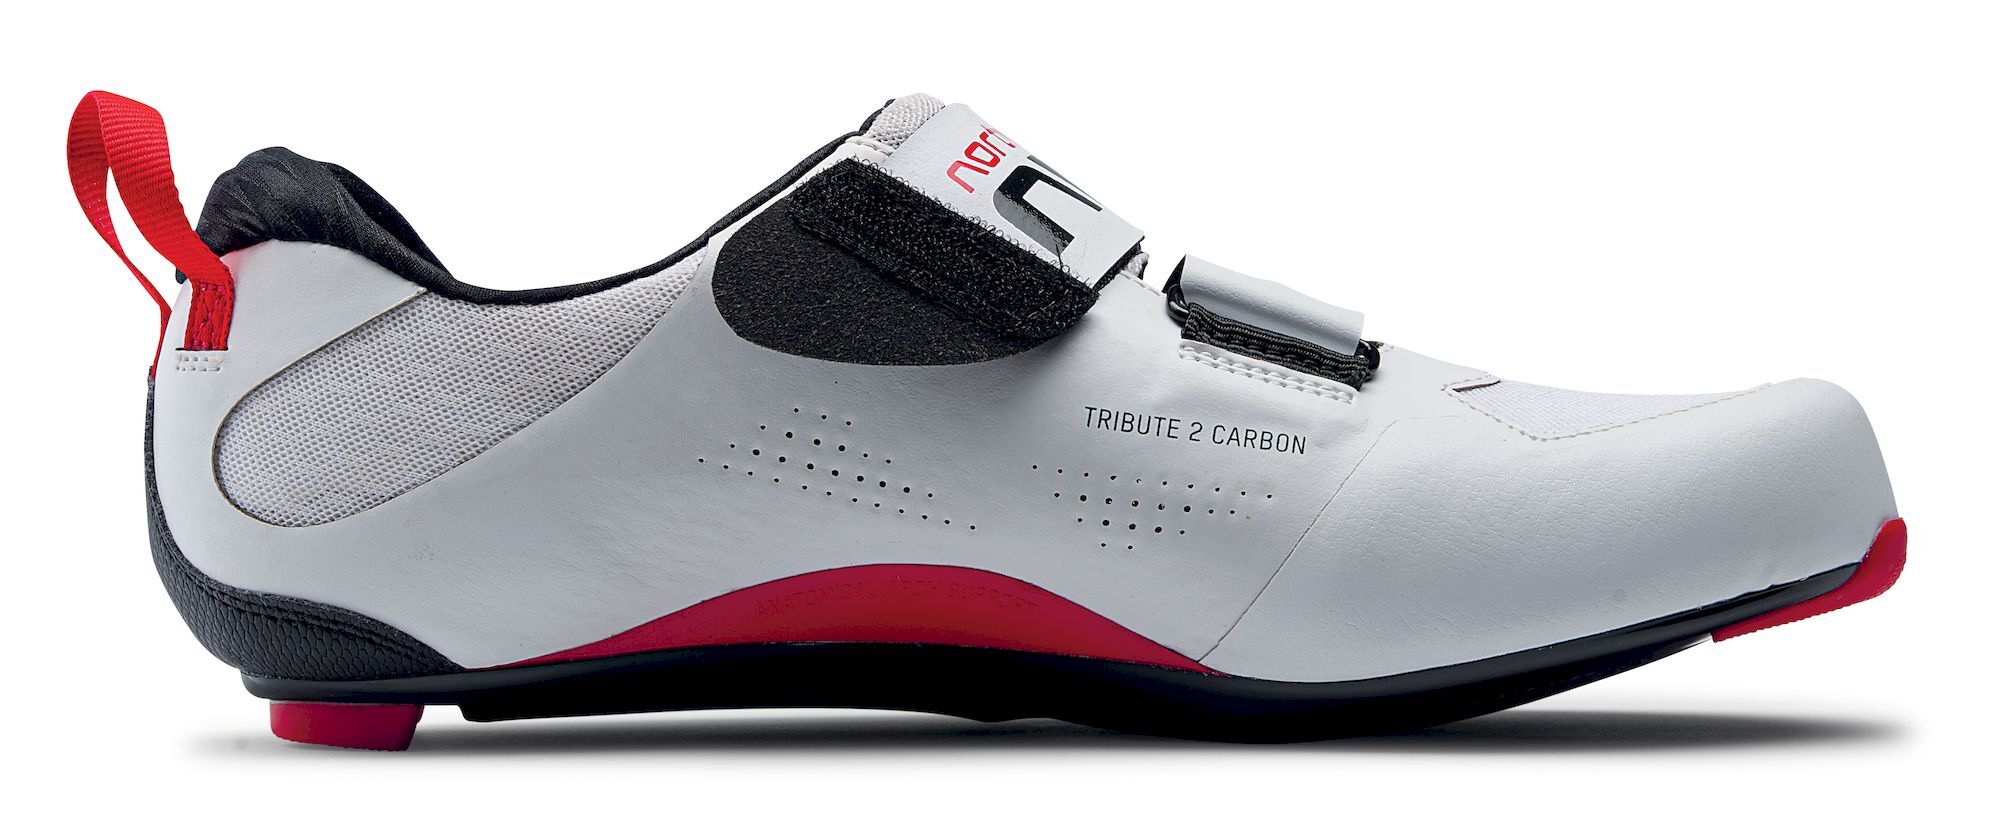 Northwave Tribute 2 Carbon - Cycling shoes | Hardloop